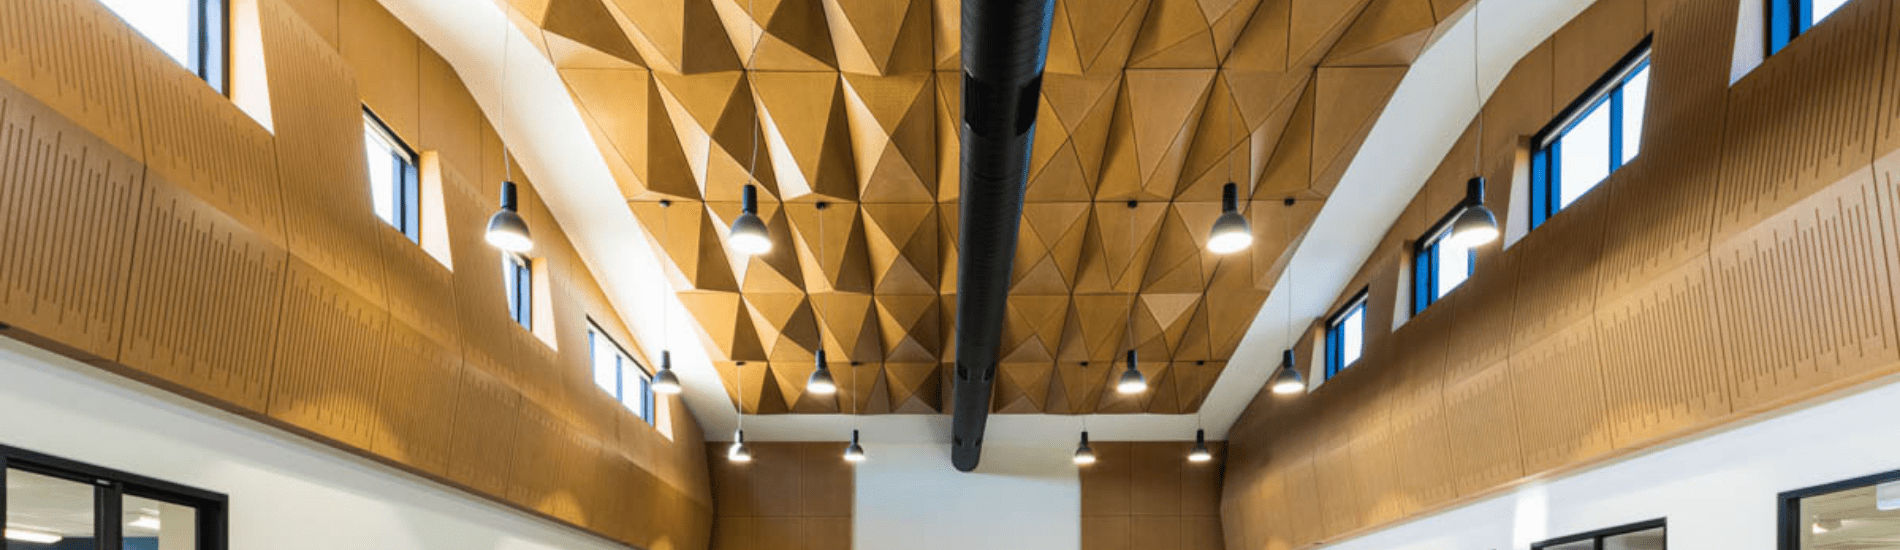 Incredible three-dimensional feature ceiling created for new college learning centre.